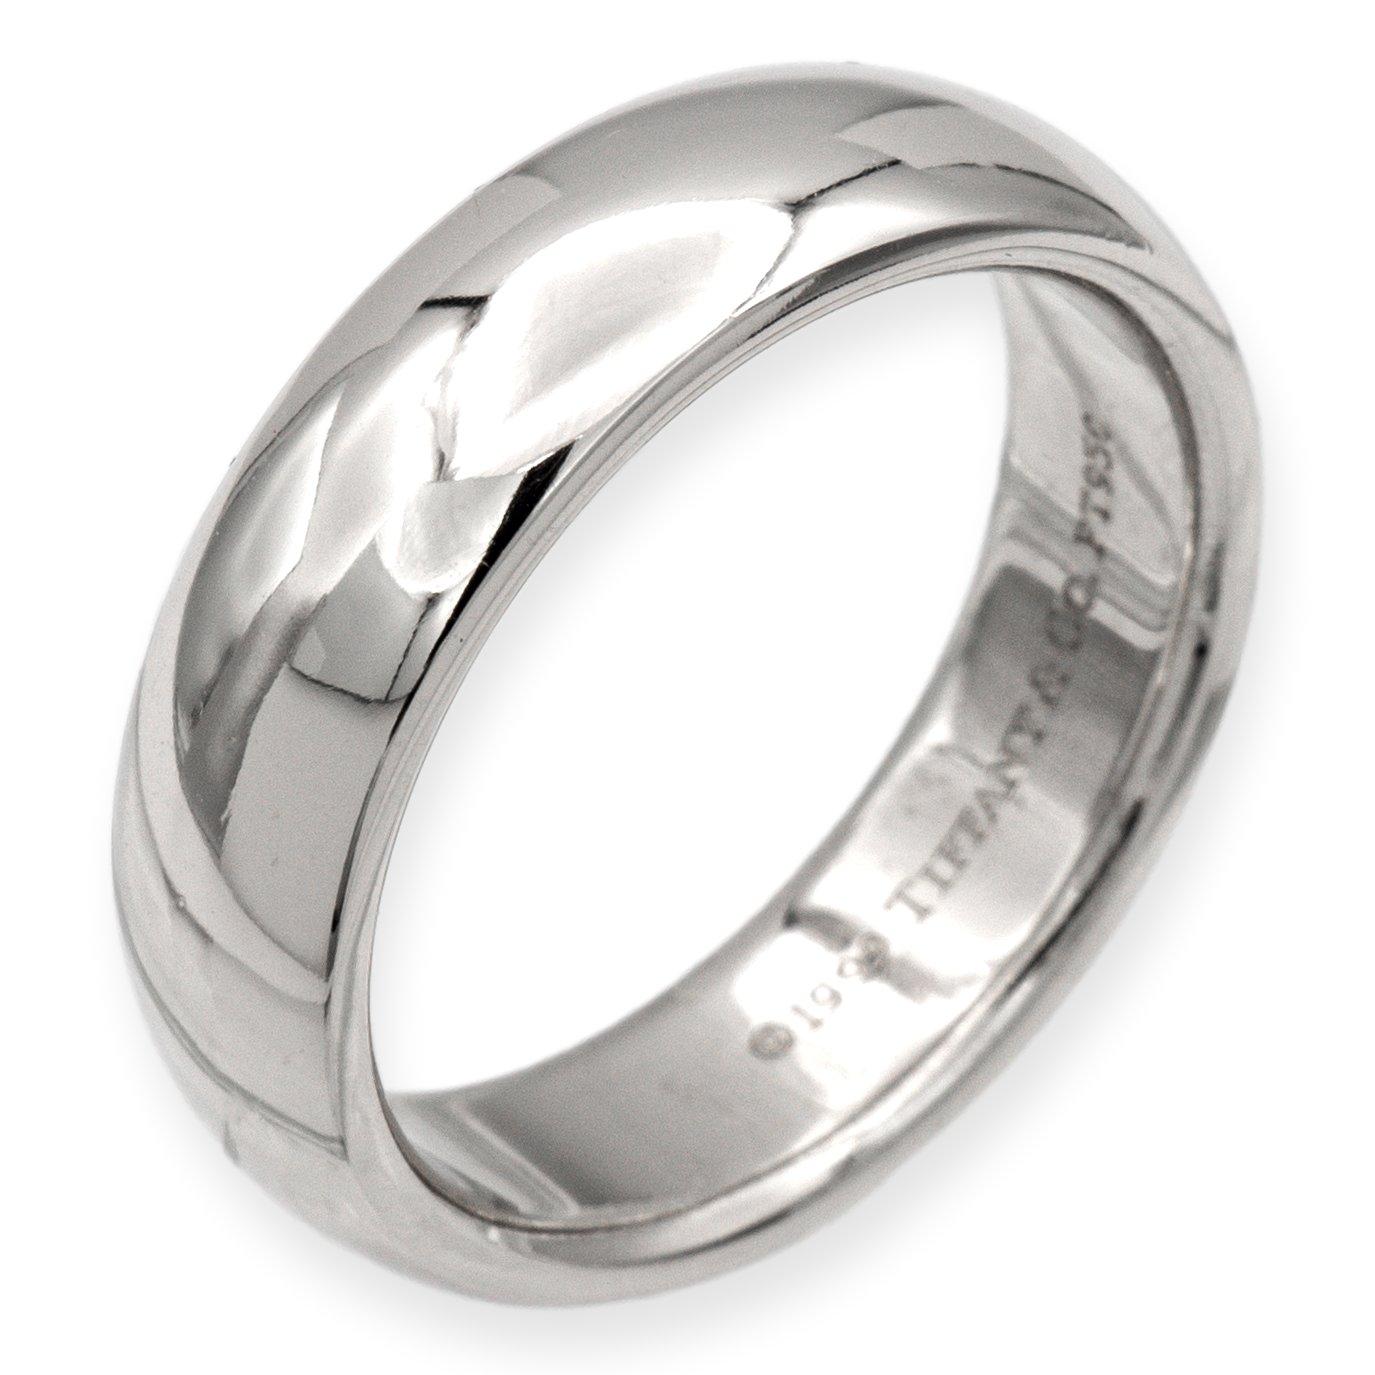 Tiffany & Co. 6mm Classic wedding band ring finely crafted in platinum. Made in 1999. Fully hallmarked with logo and metal content.

Ring Specifications
Brand: Tiffany & Co.
Style: Classic (comfort-fit)
Hallmarks: © 1999 Tiffany & Co. PT950
Finger